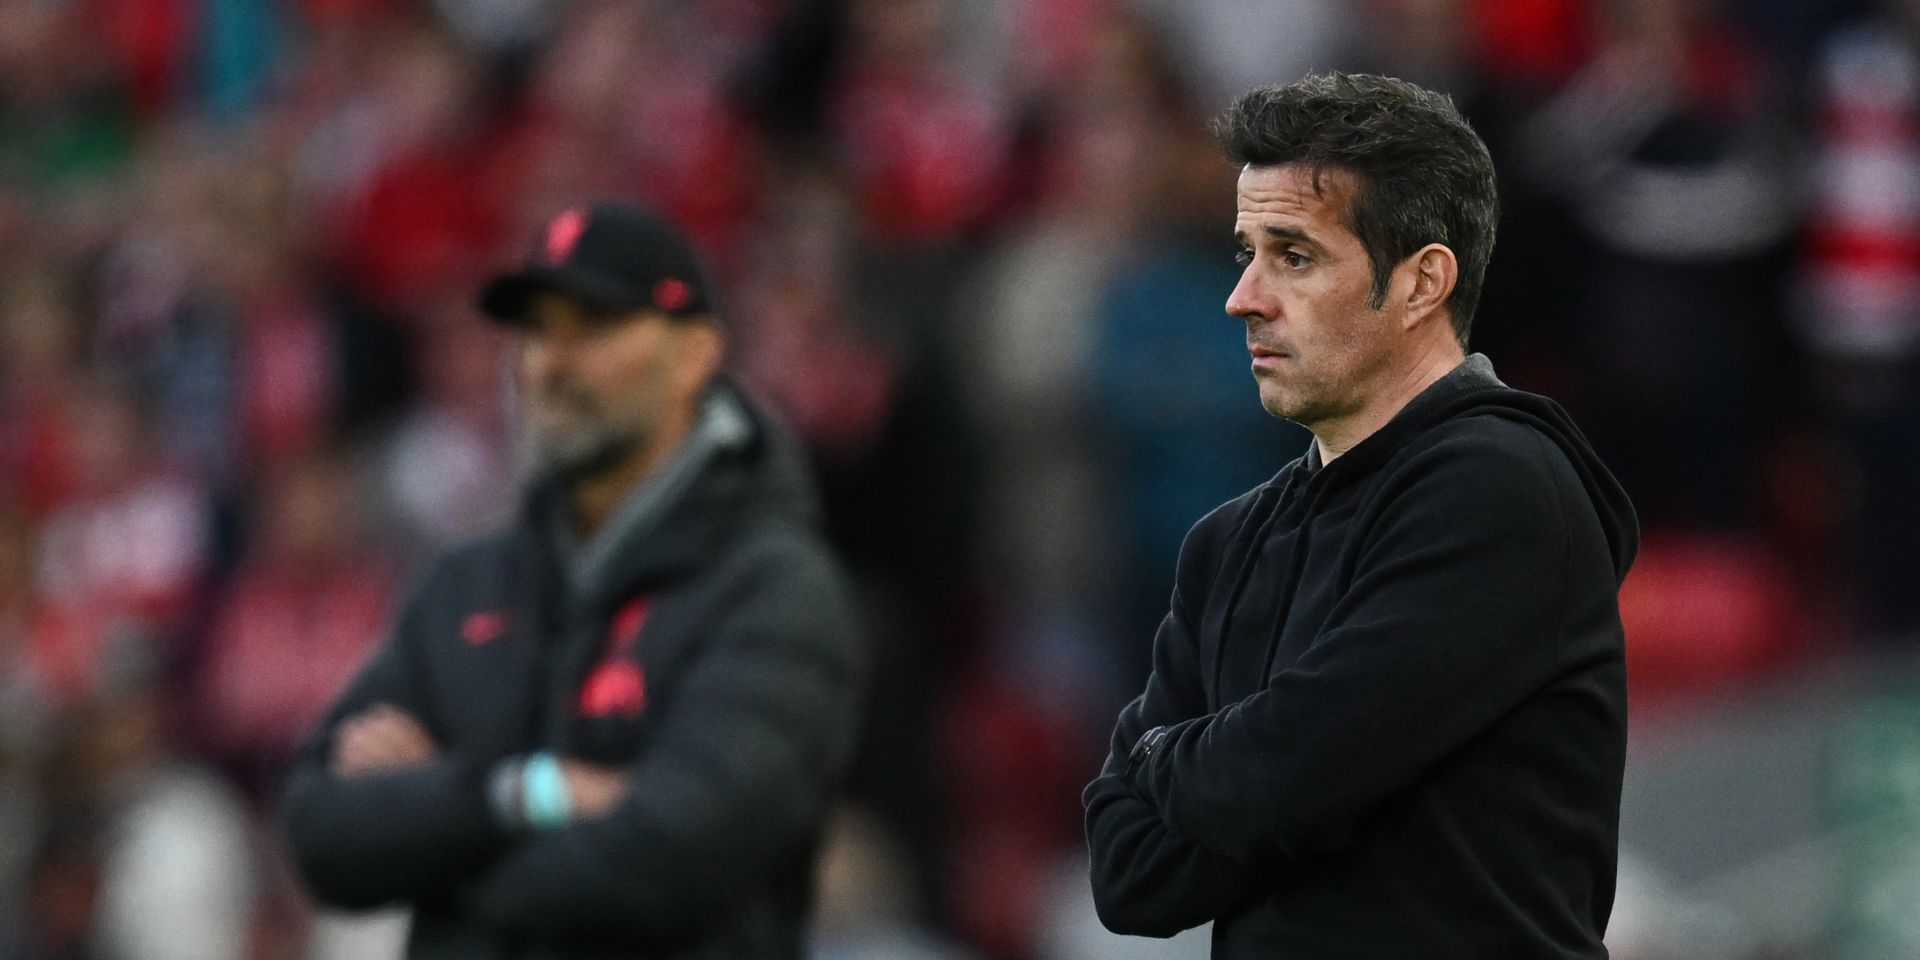 Marco Silva’s fear of Anfield clear as ex-Everton boss takes Fulham to Liverpool